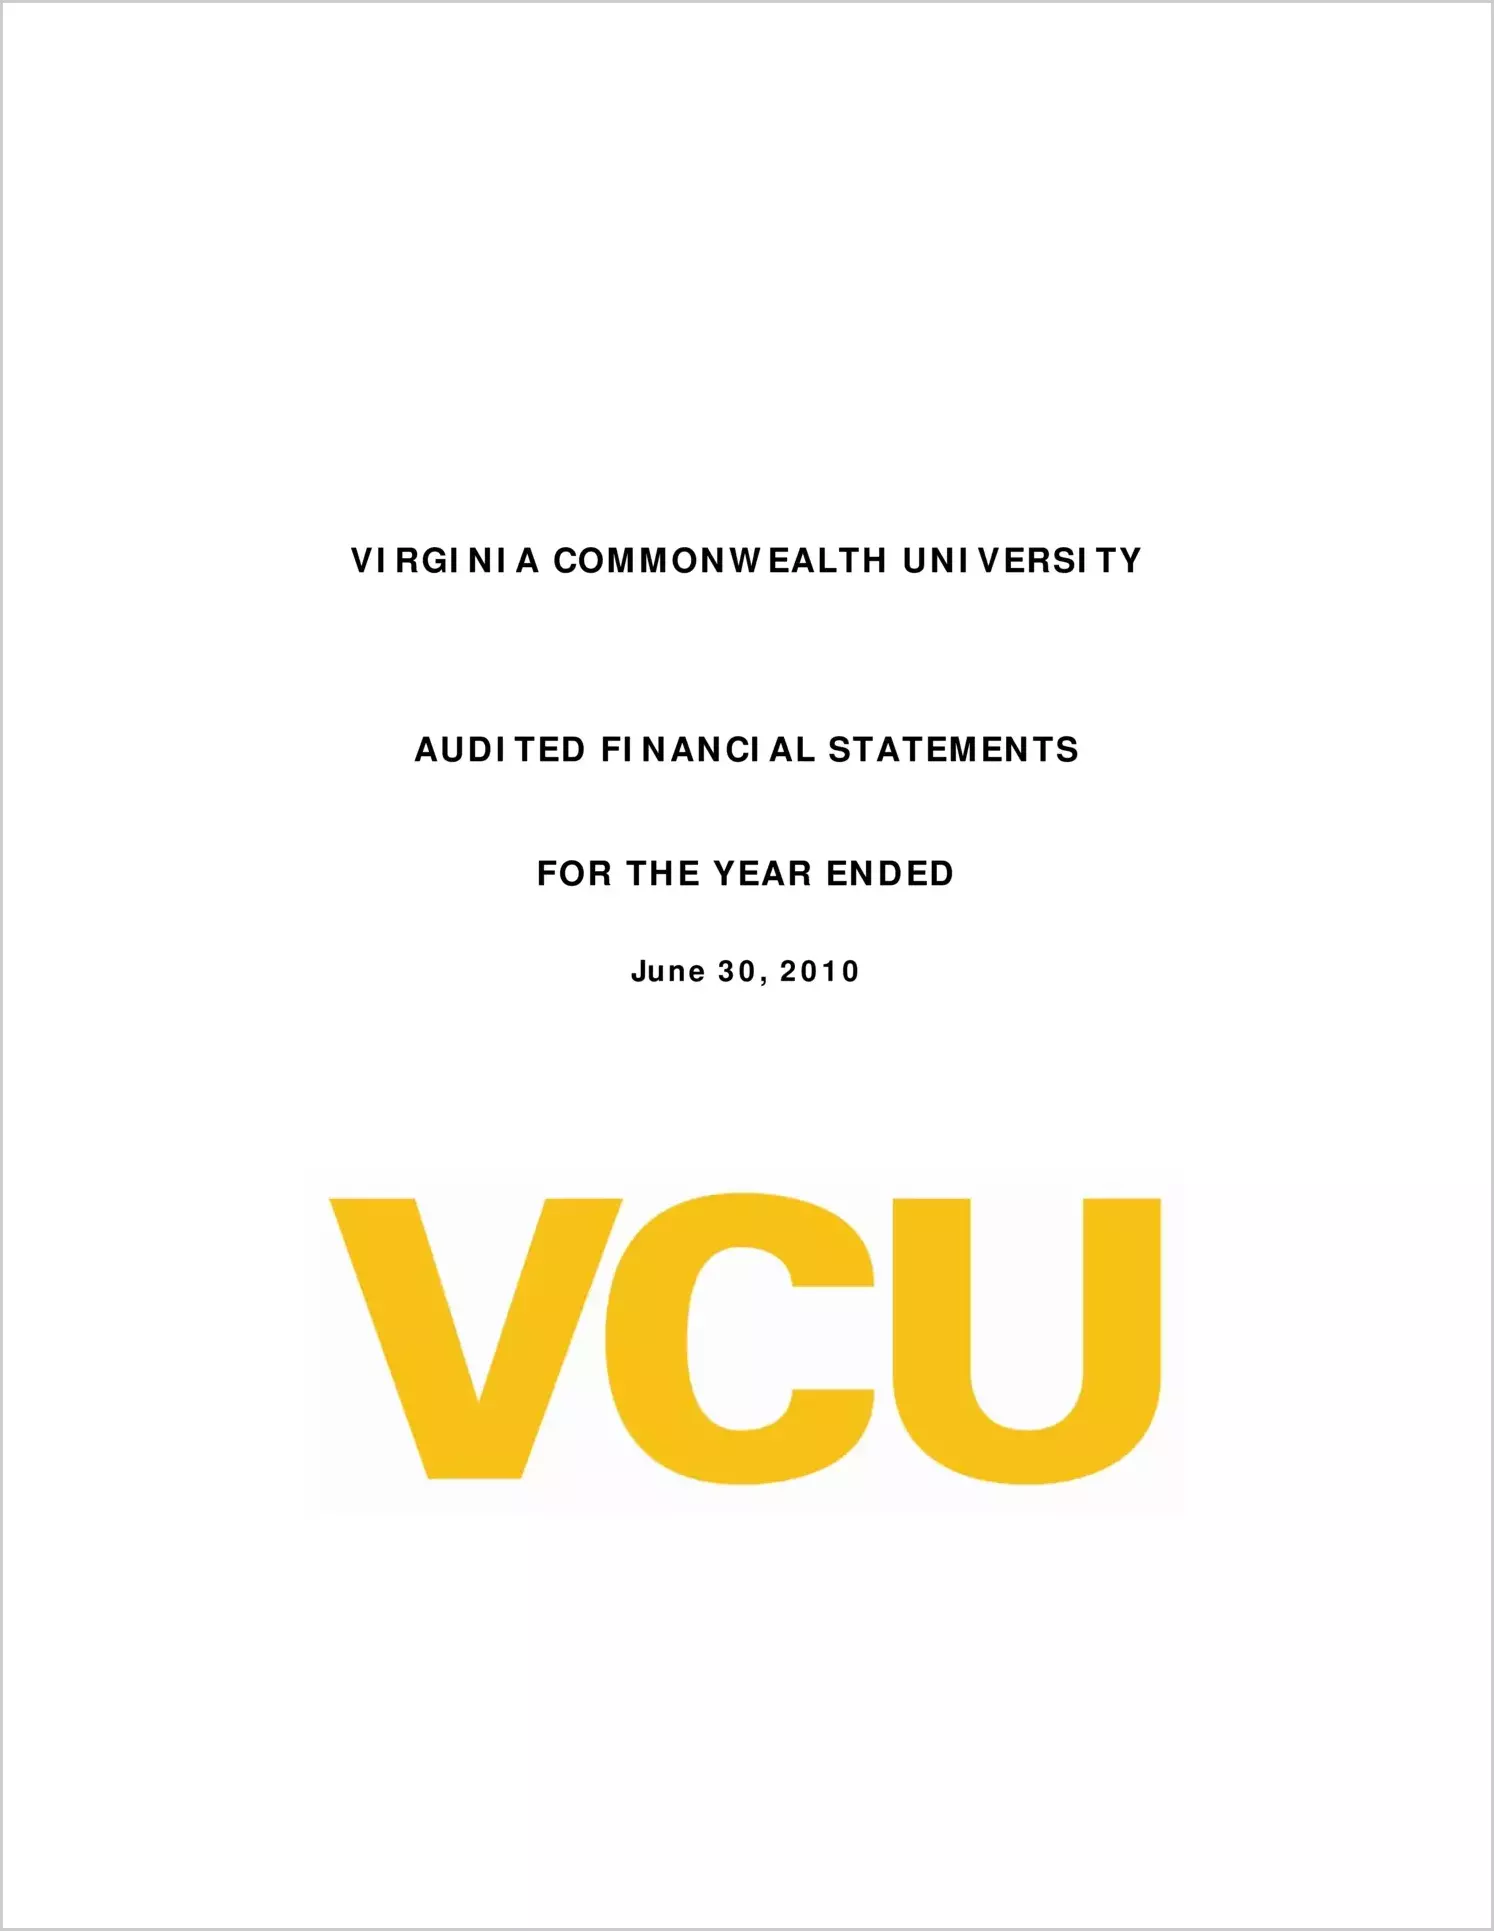 Virginia Commonwealth University  Finanical Statements Report for the year ended June 30, 2010